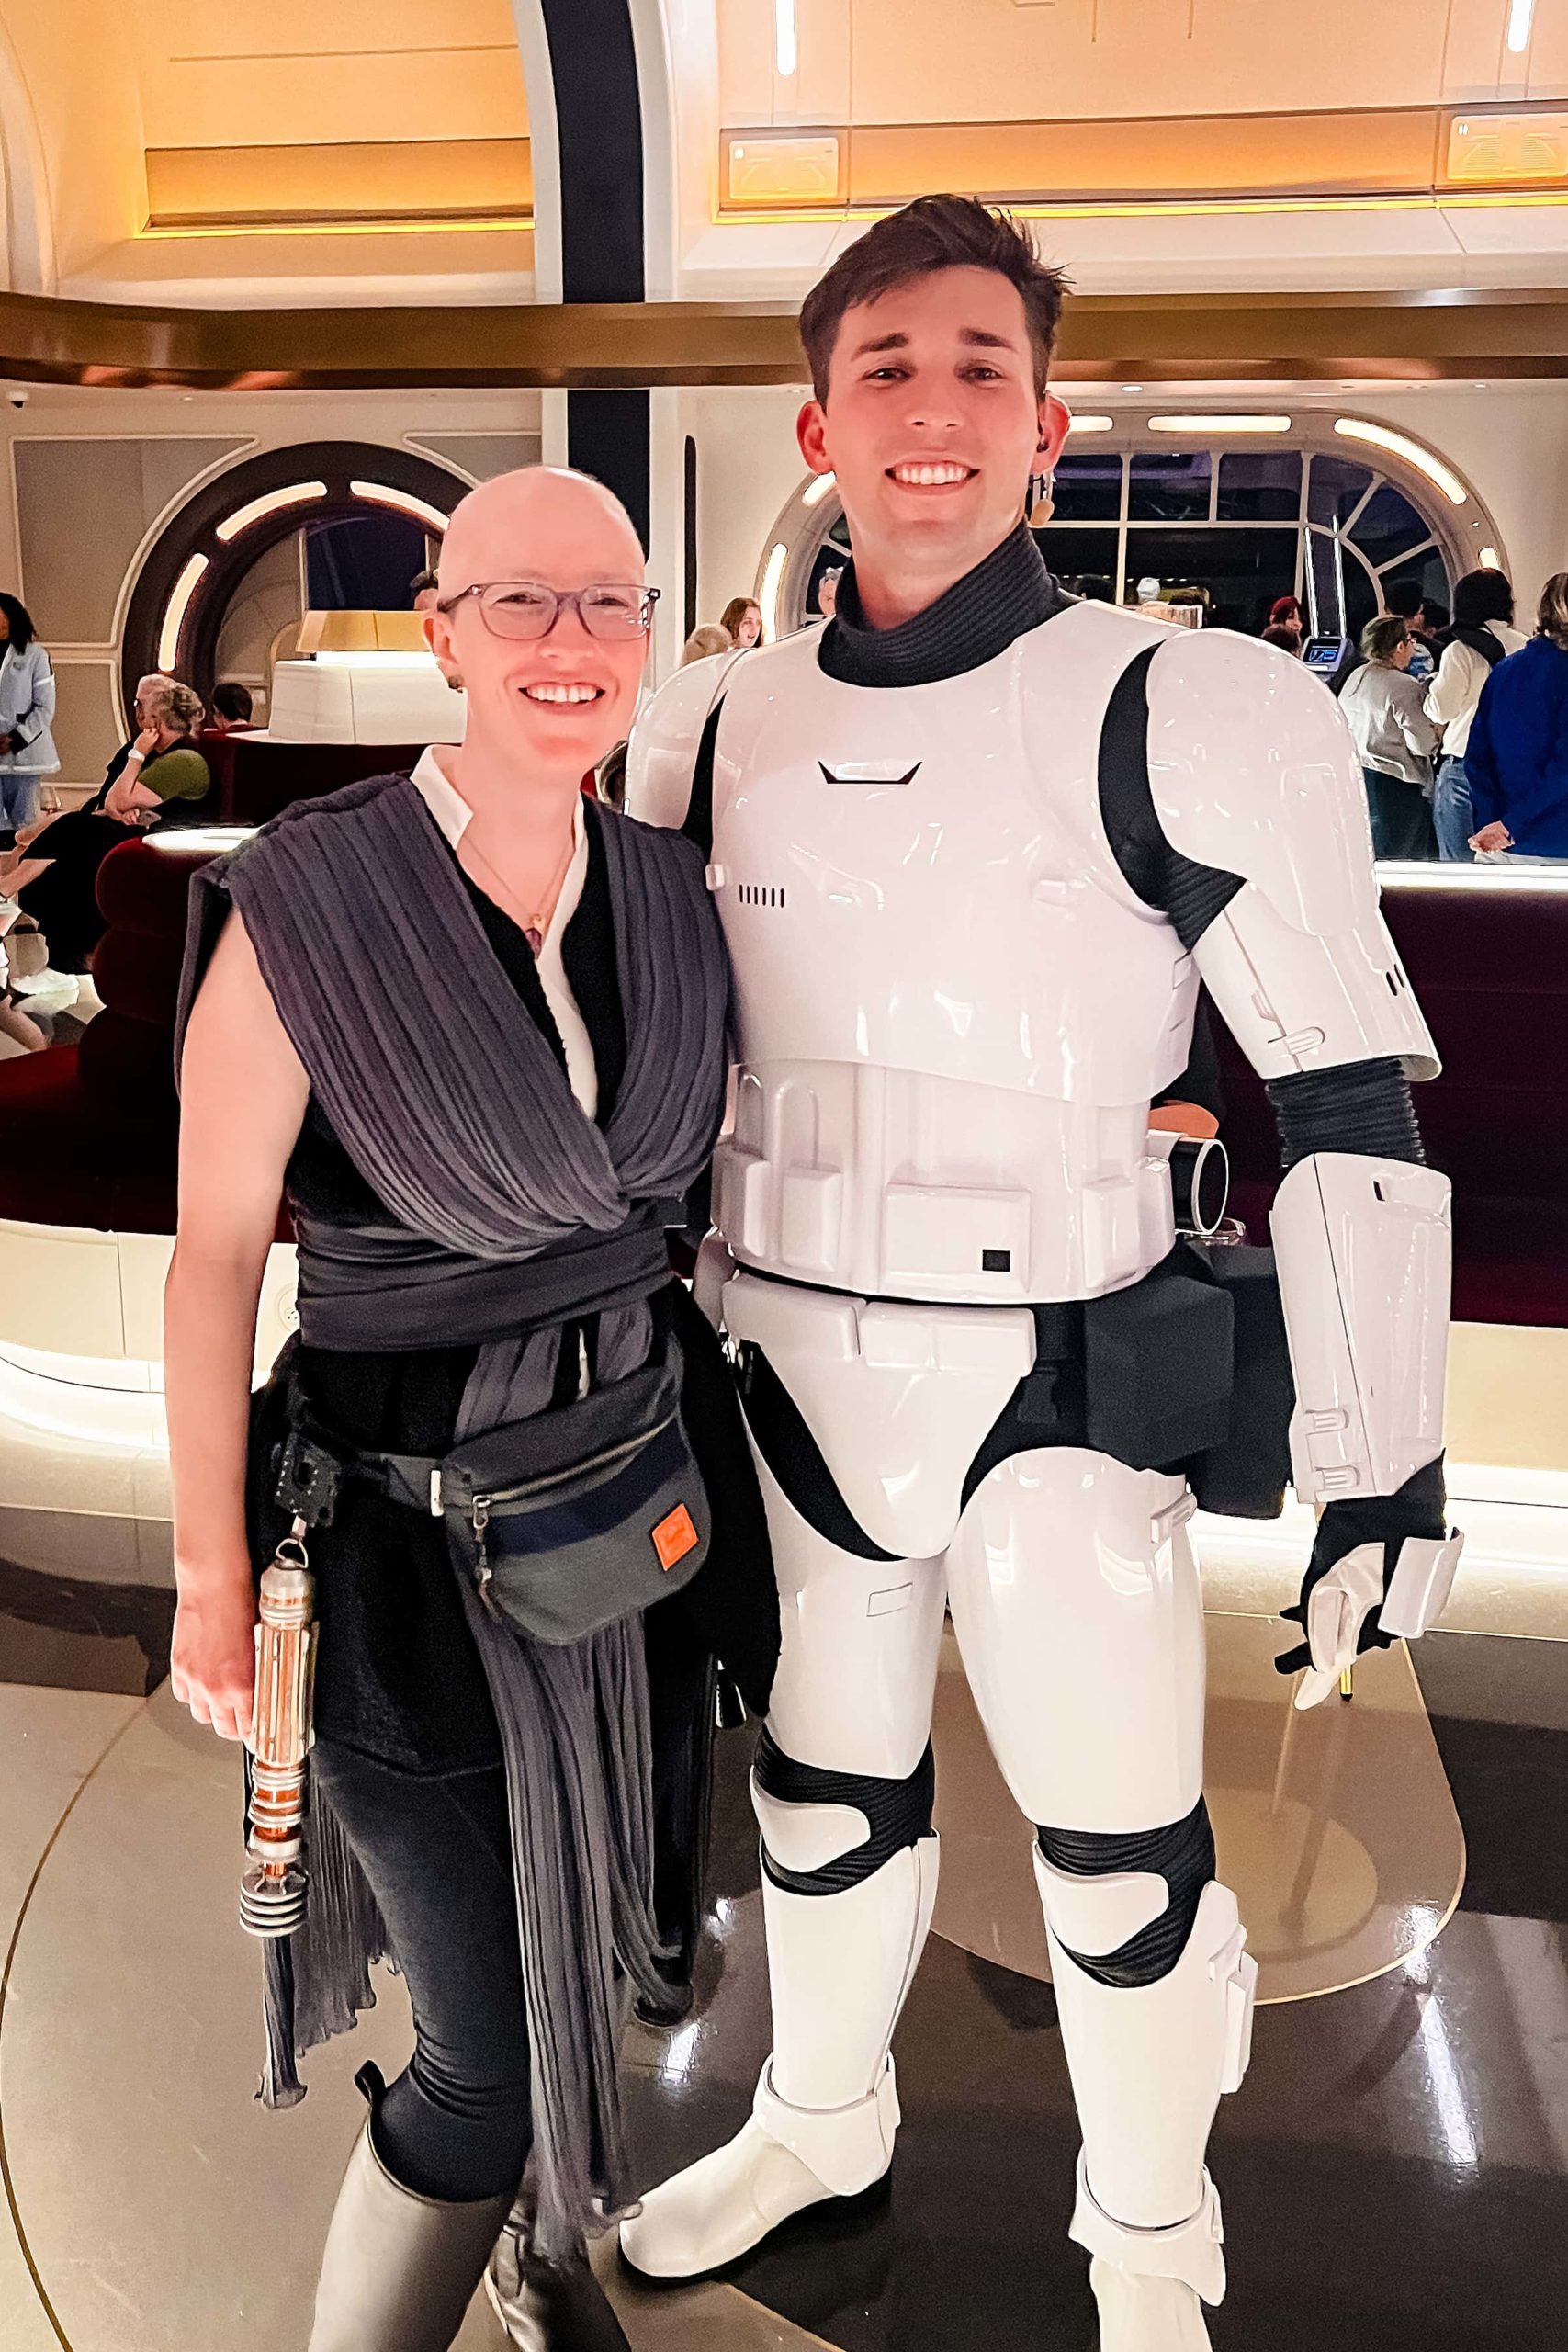 Sammie infiltrated the First Order and saved the day!